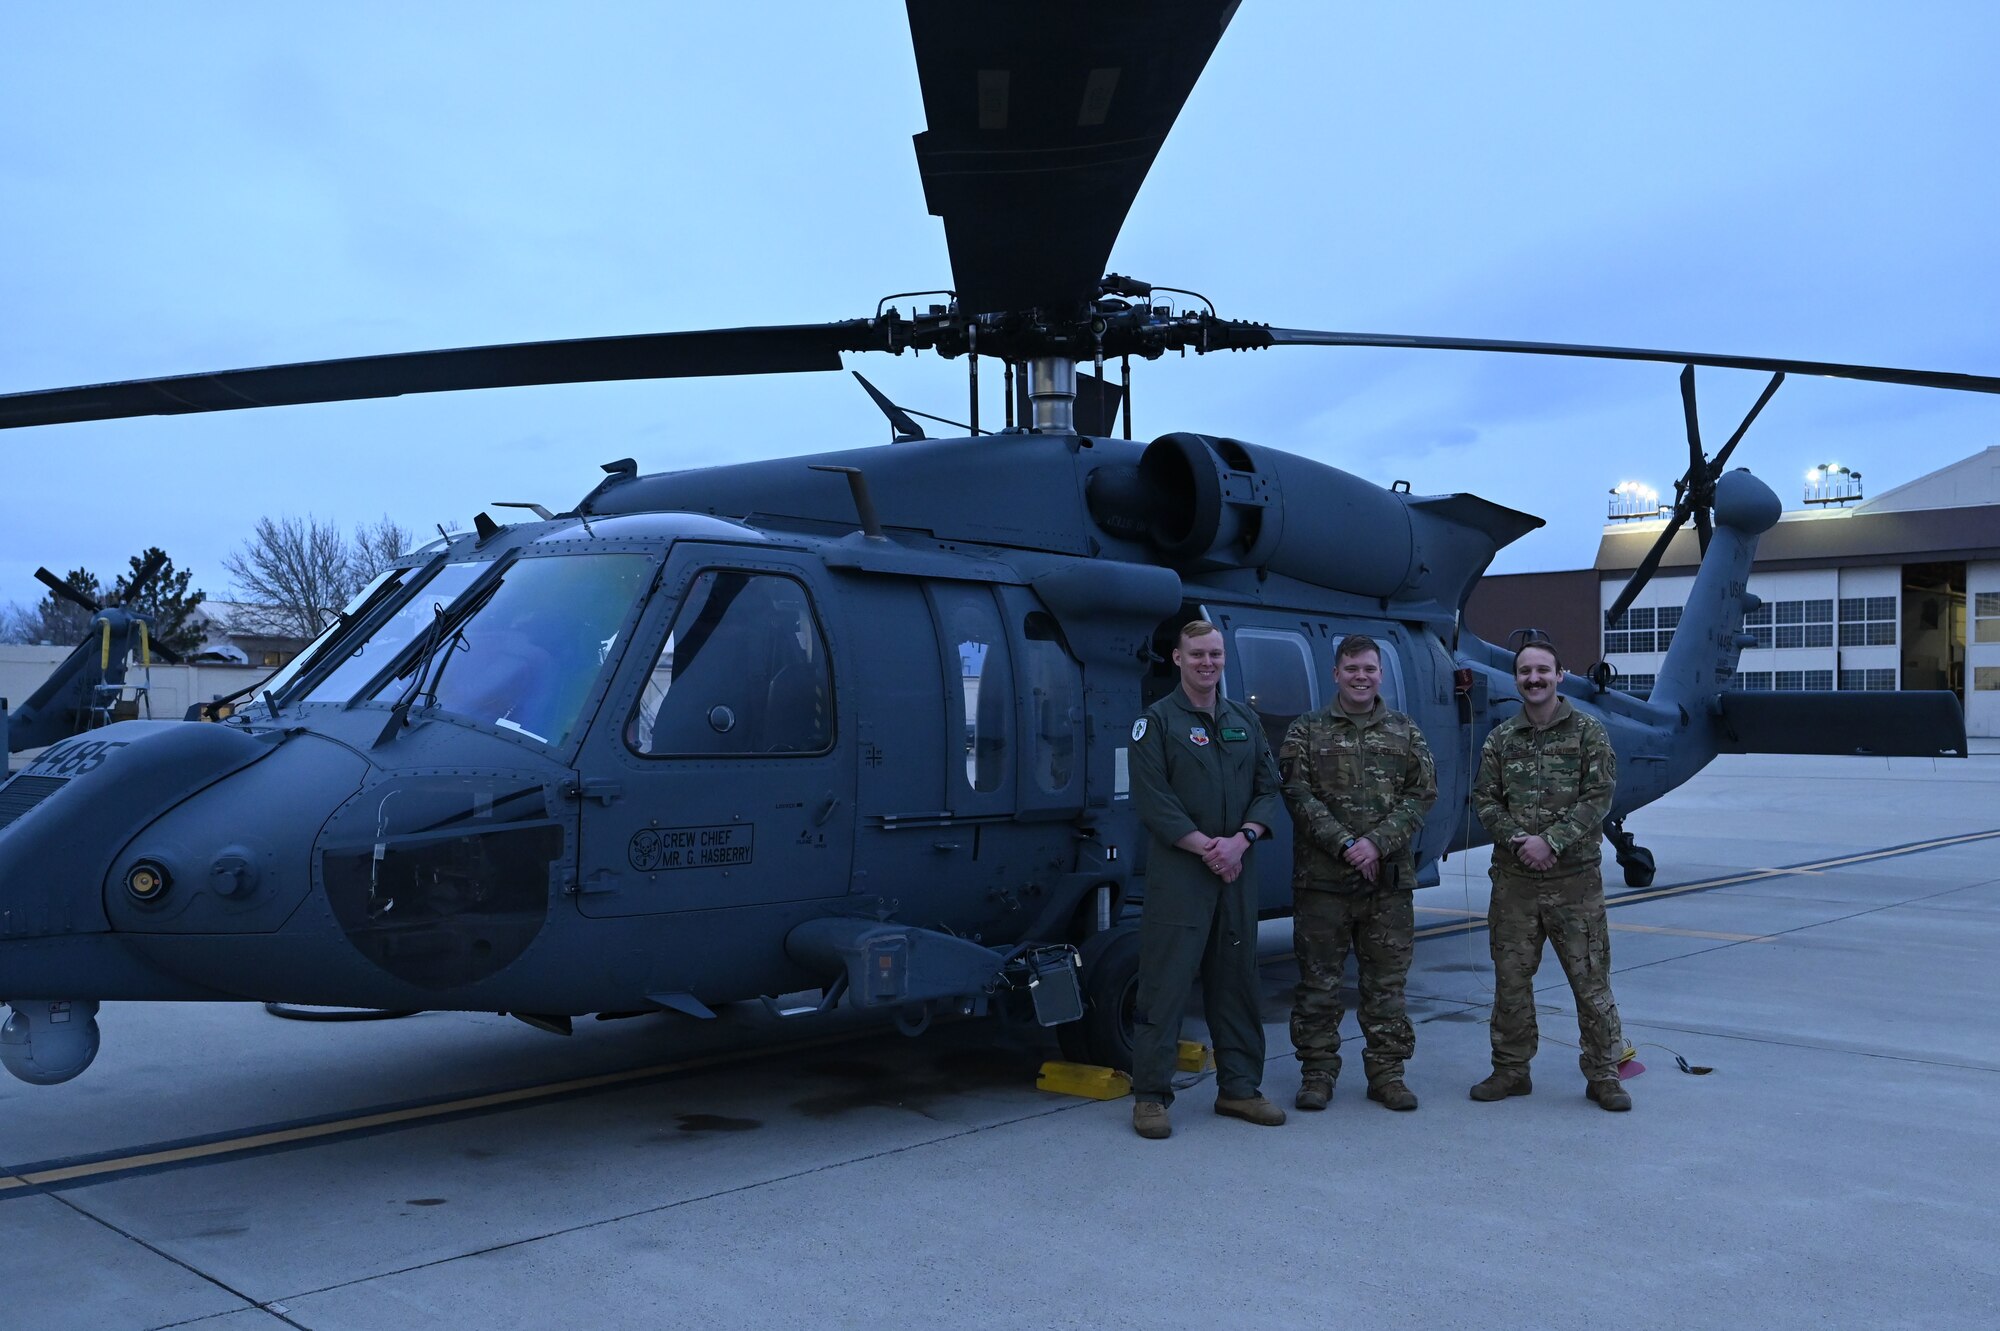 Three men stand in front of a helicopter.